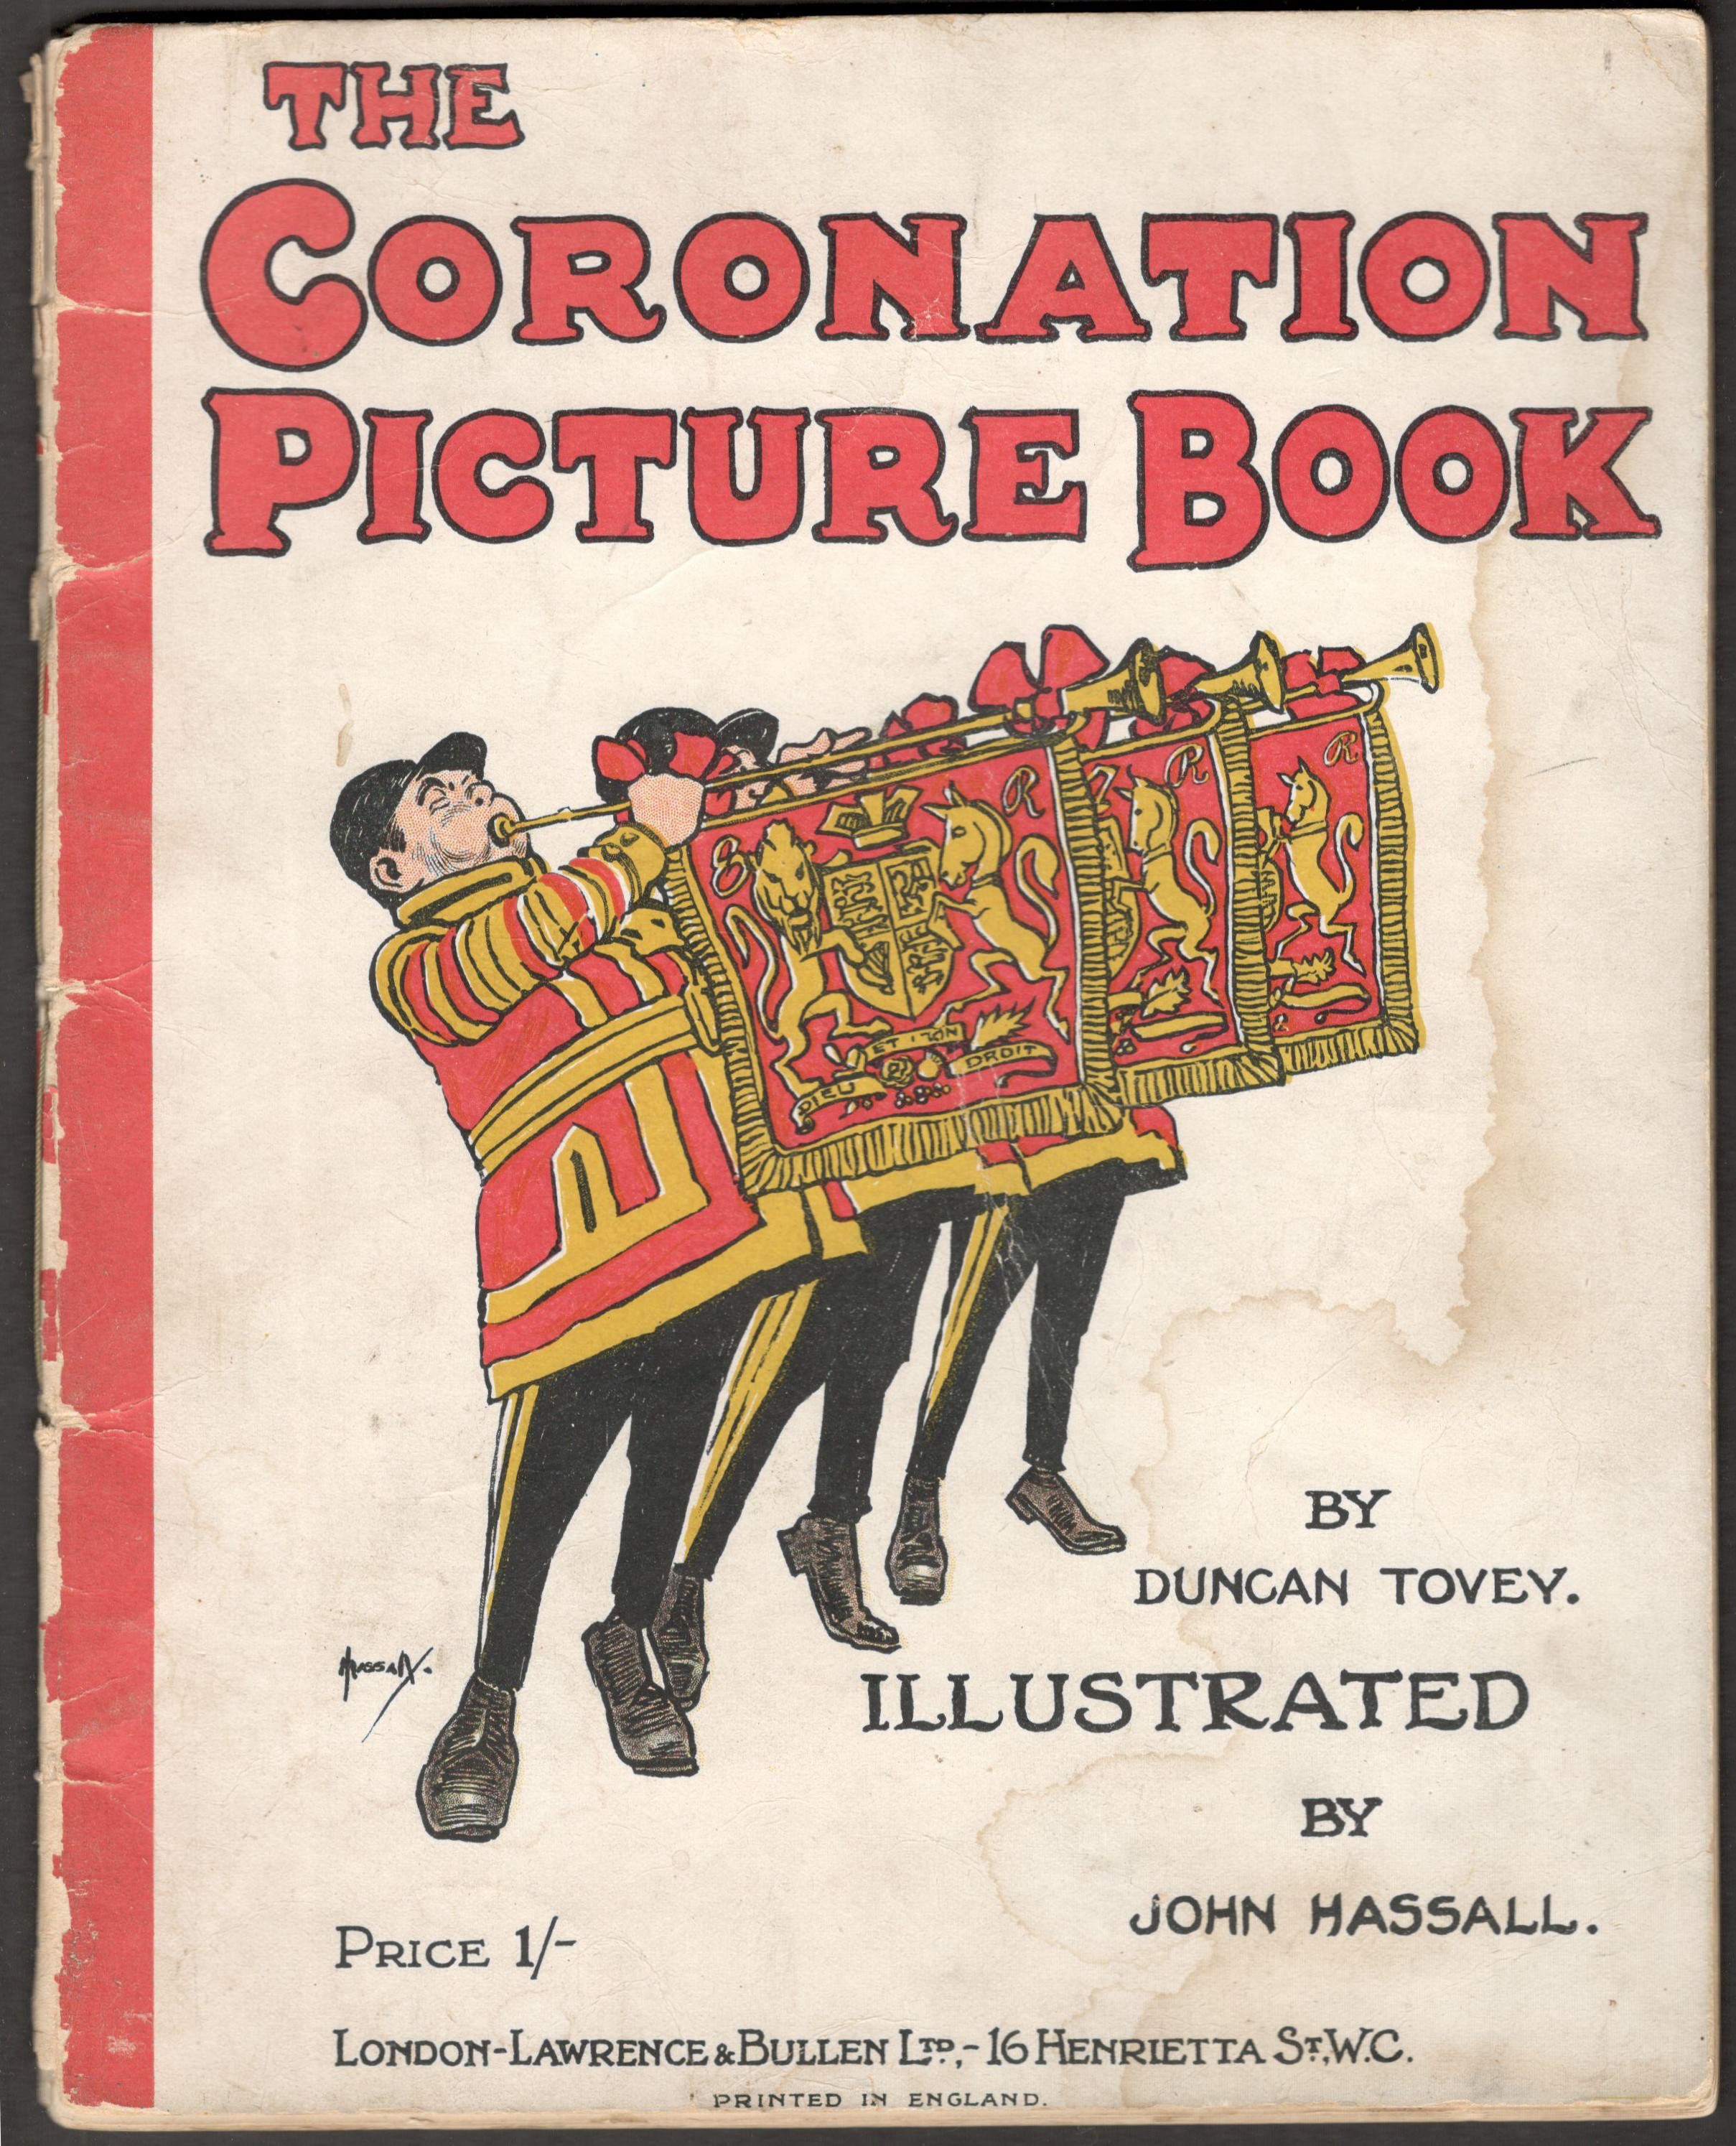 THE CORONATION PICTURE BOOK BY DUNCAN TOVEY ILLUSTRATED BY JOHN HASSALL IN ACCEPTABLE CONDITION